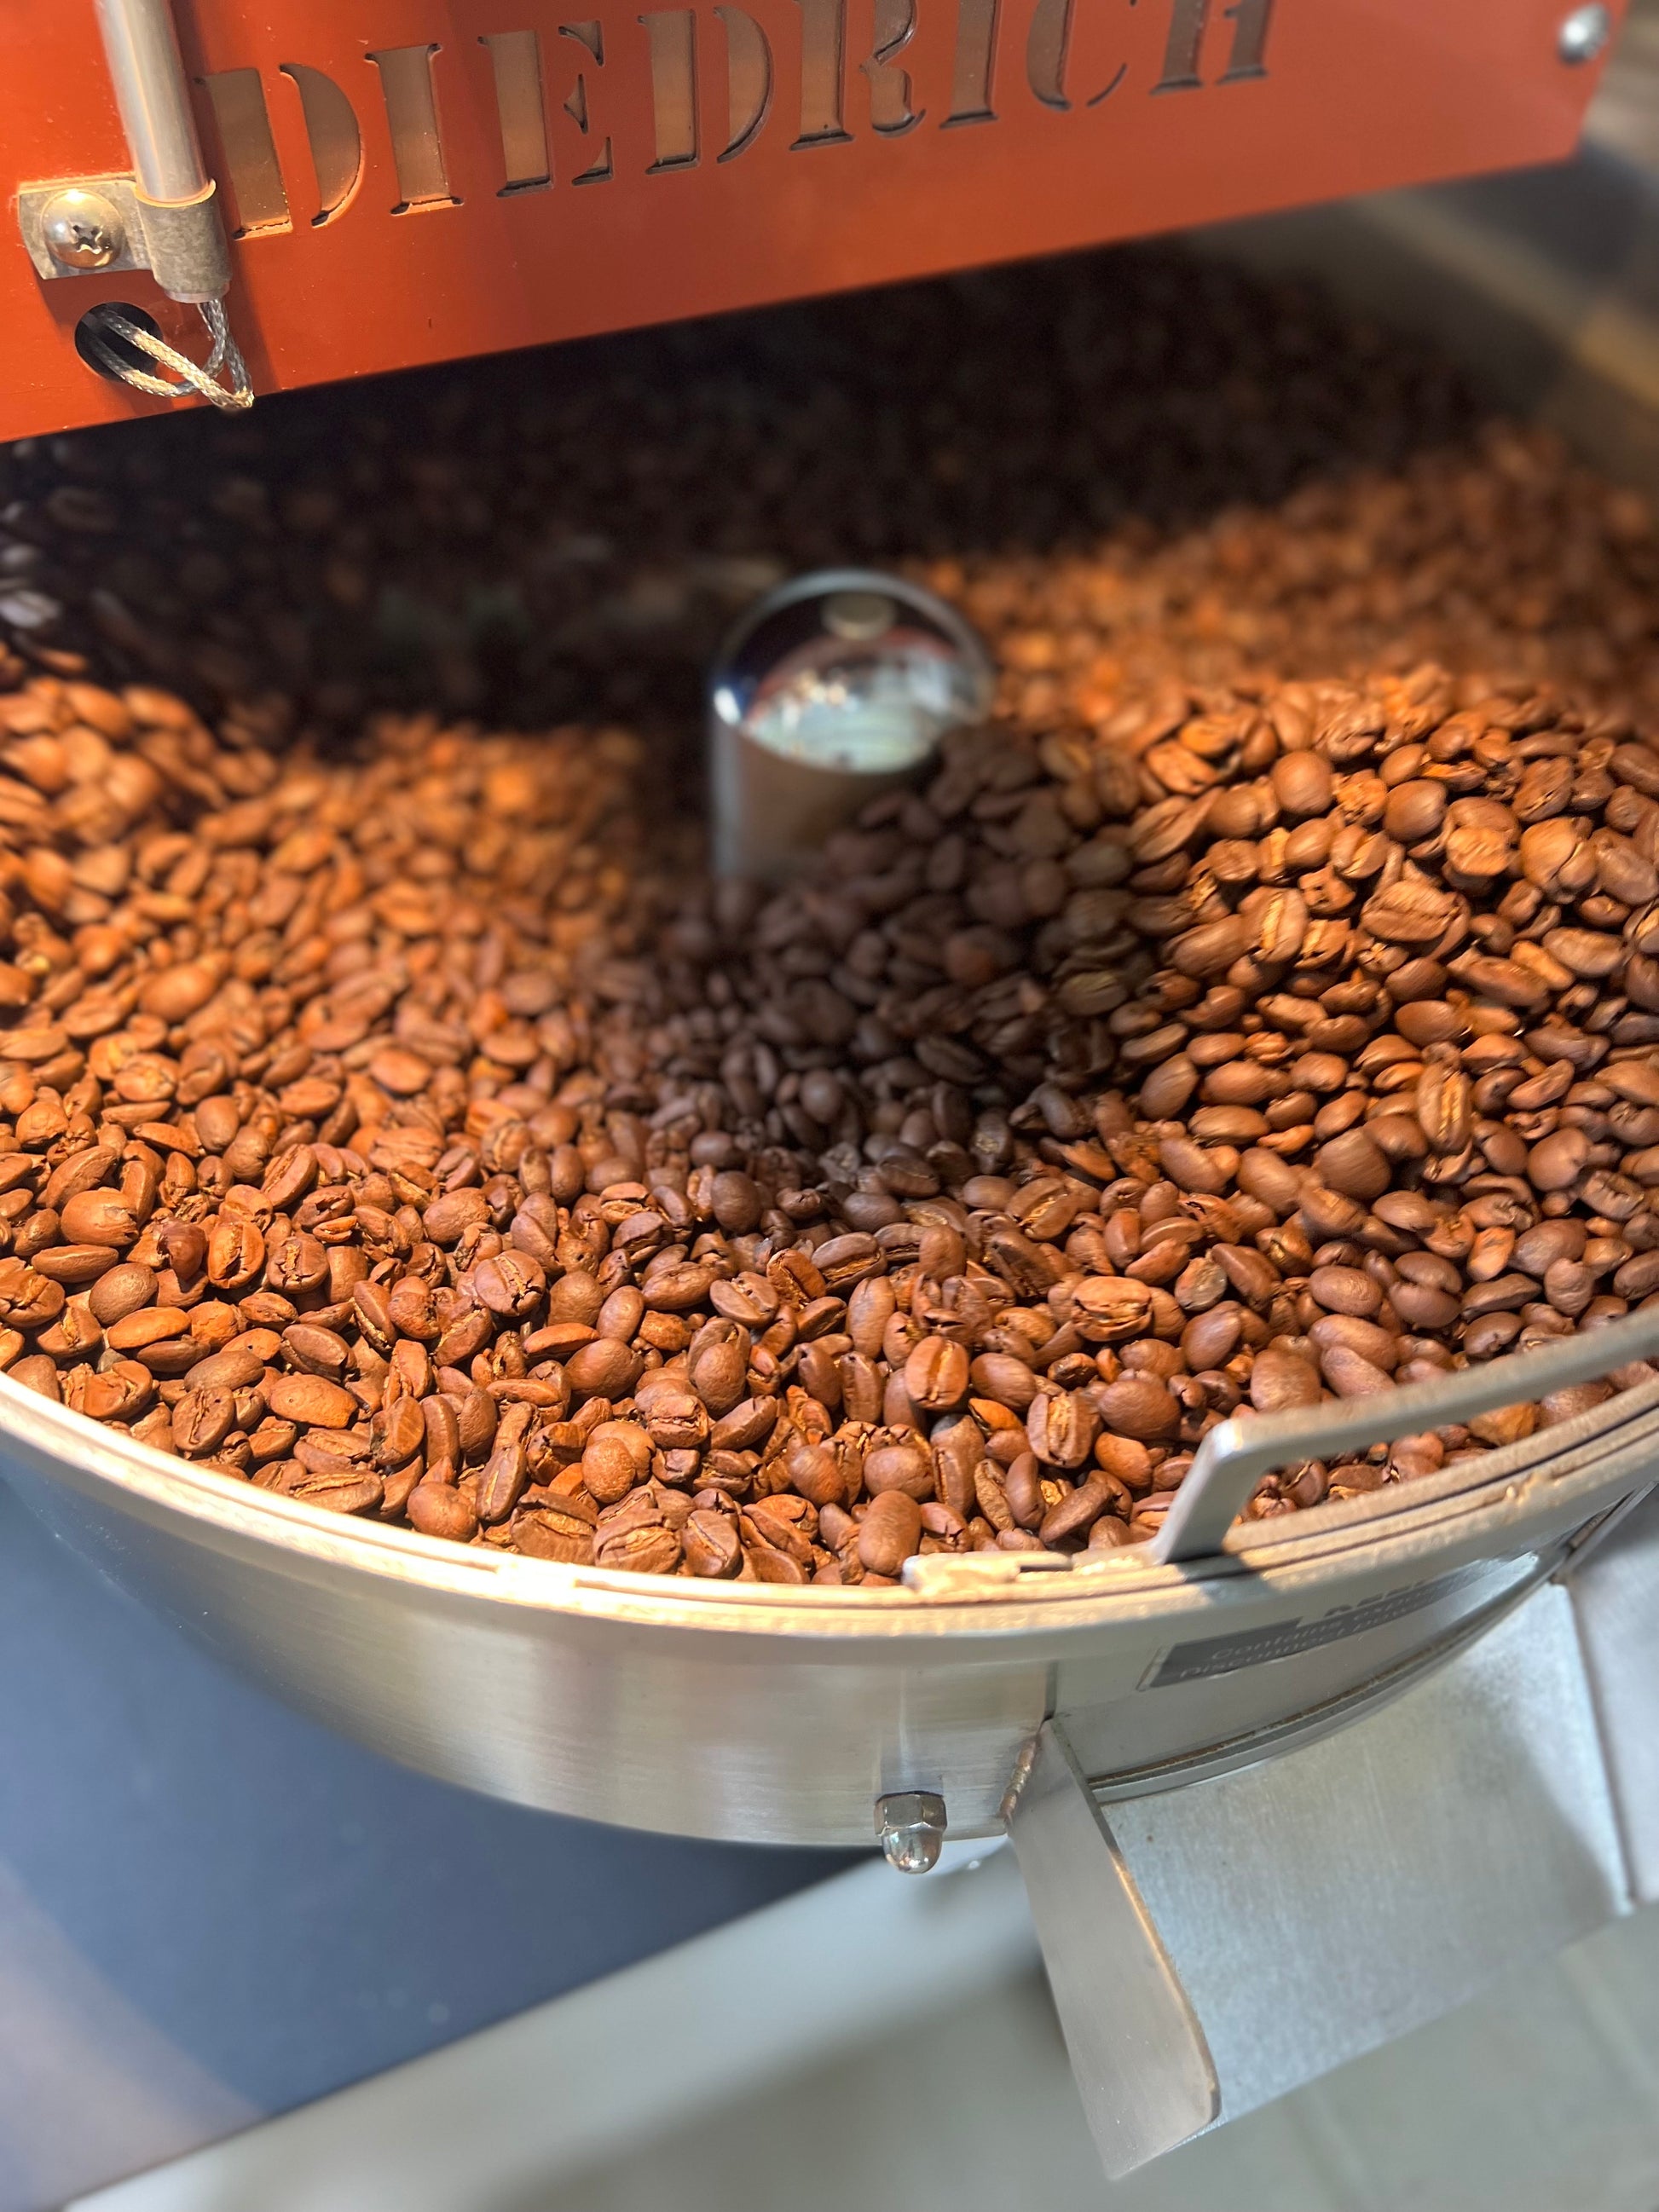 Roasted Coffee cooling on tray